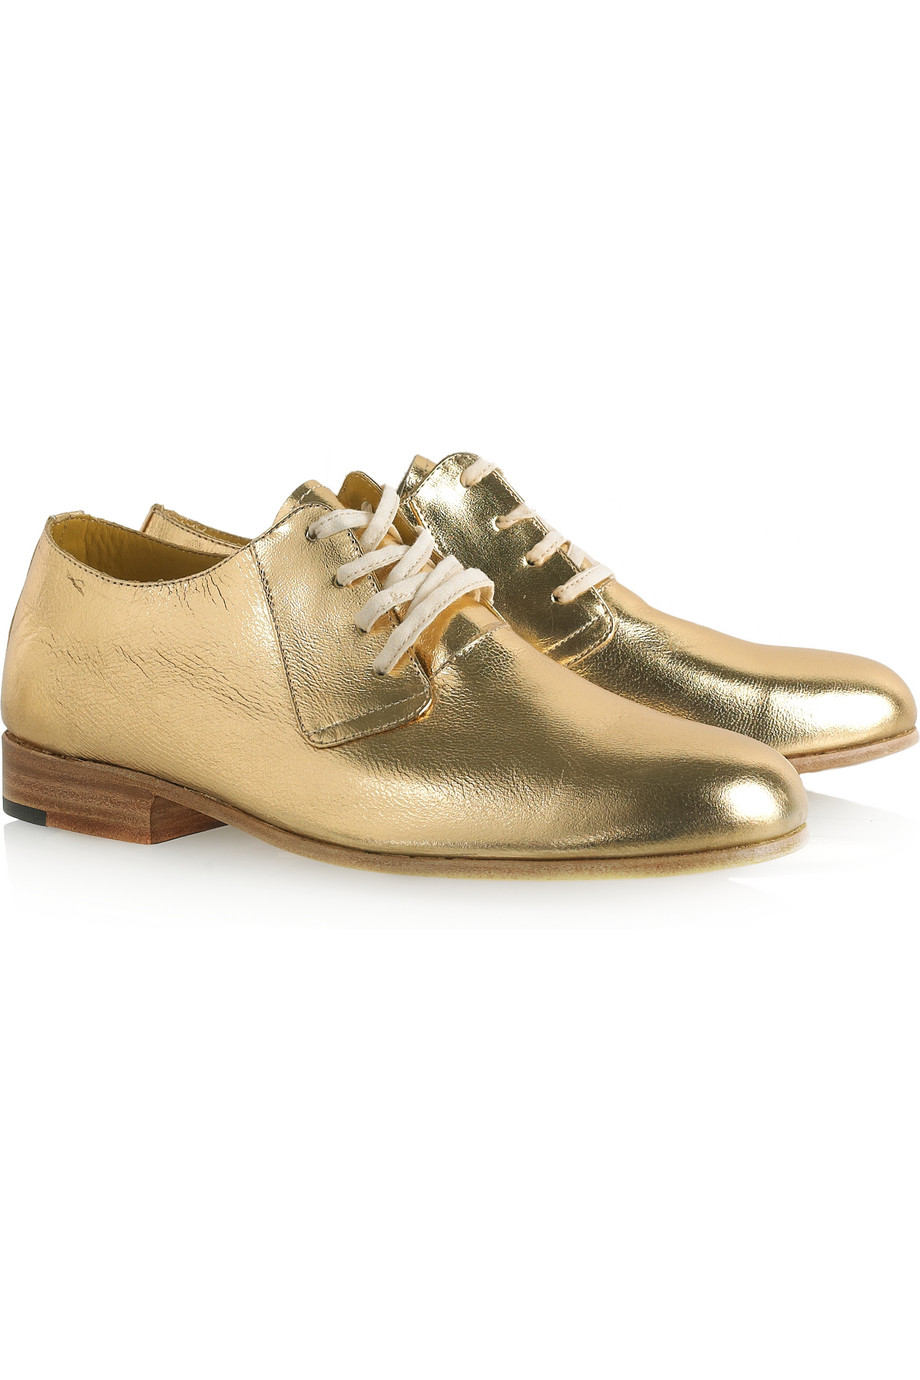 Lyst - Esquivel Metallic Leather Derby Shoes in Metallic